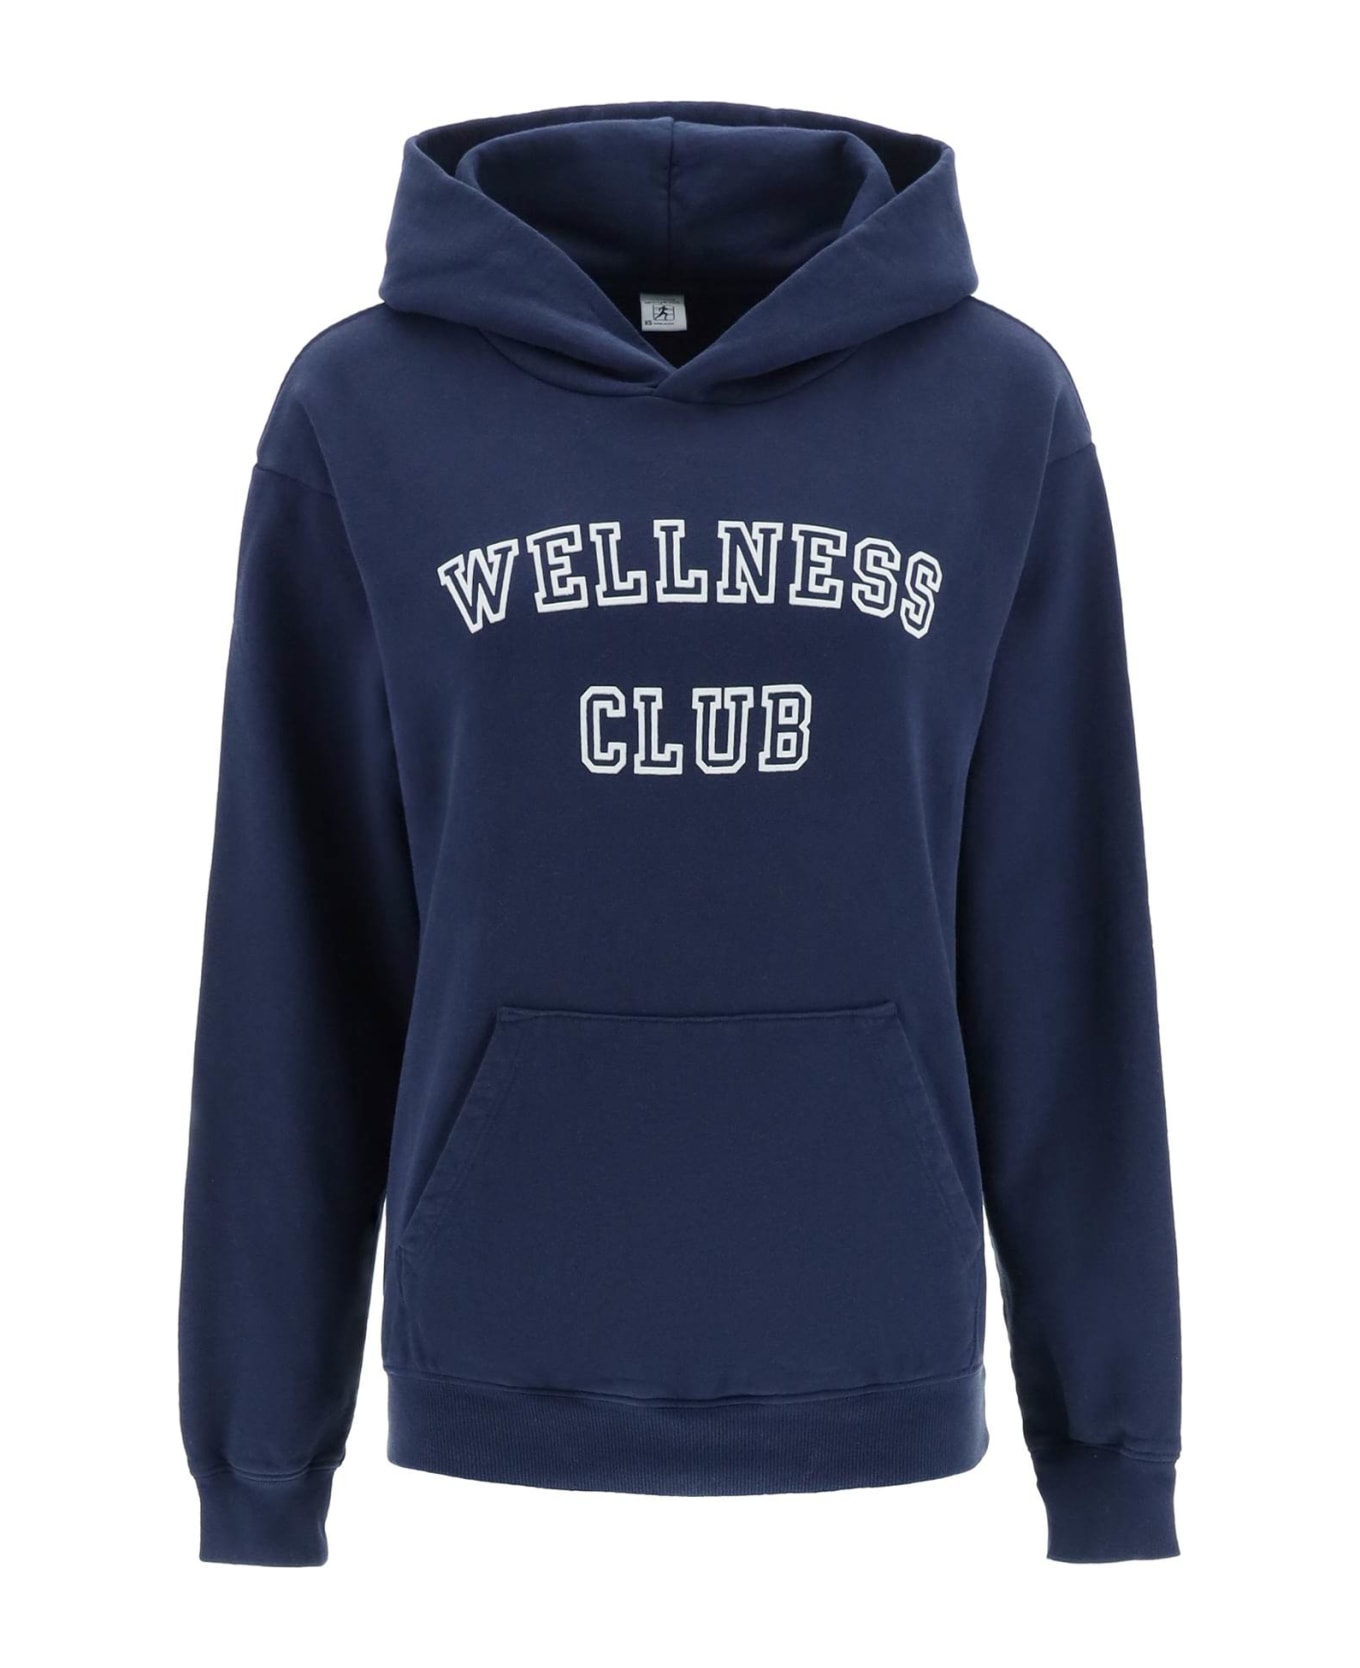 Sporty & Rich Hoodie With Lettering Logo - NAVY (Blue)